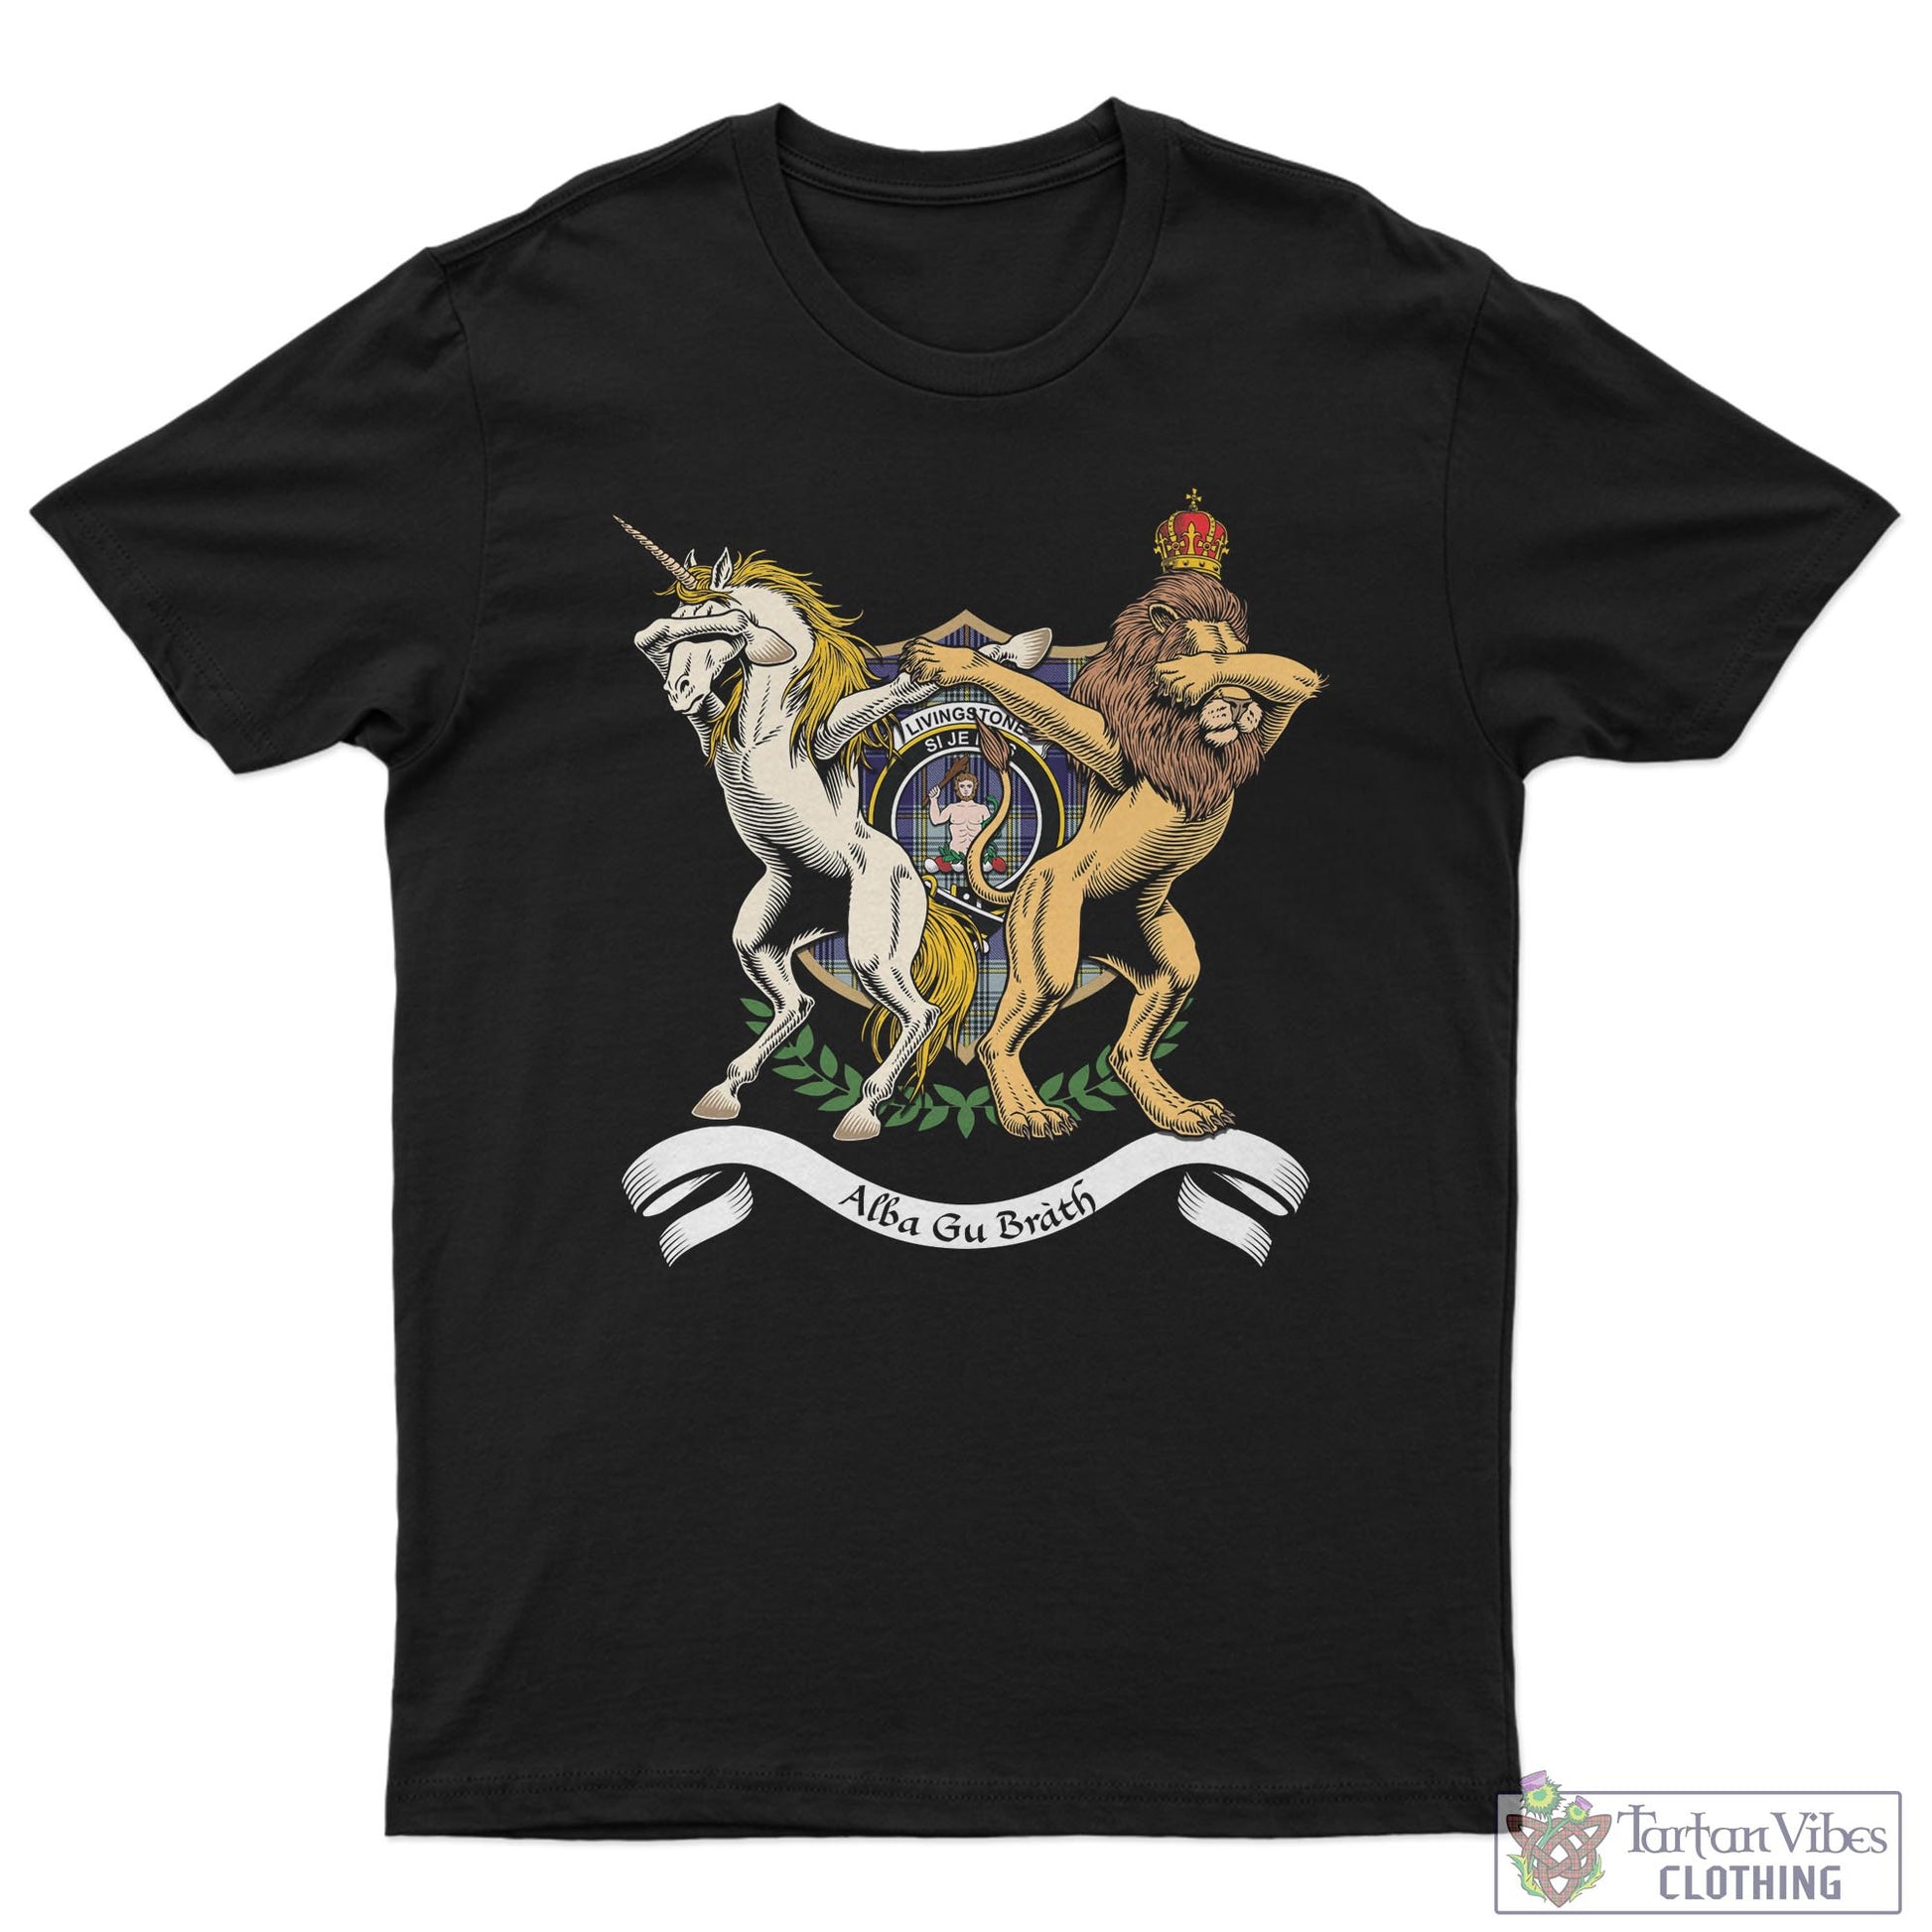 Tartan Vibes Clothing Livingston Dress Family Crest Cotton Men's T-Shirt with Scotland Royal Coat Of Arm Funny Style